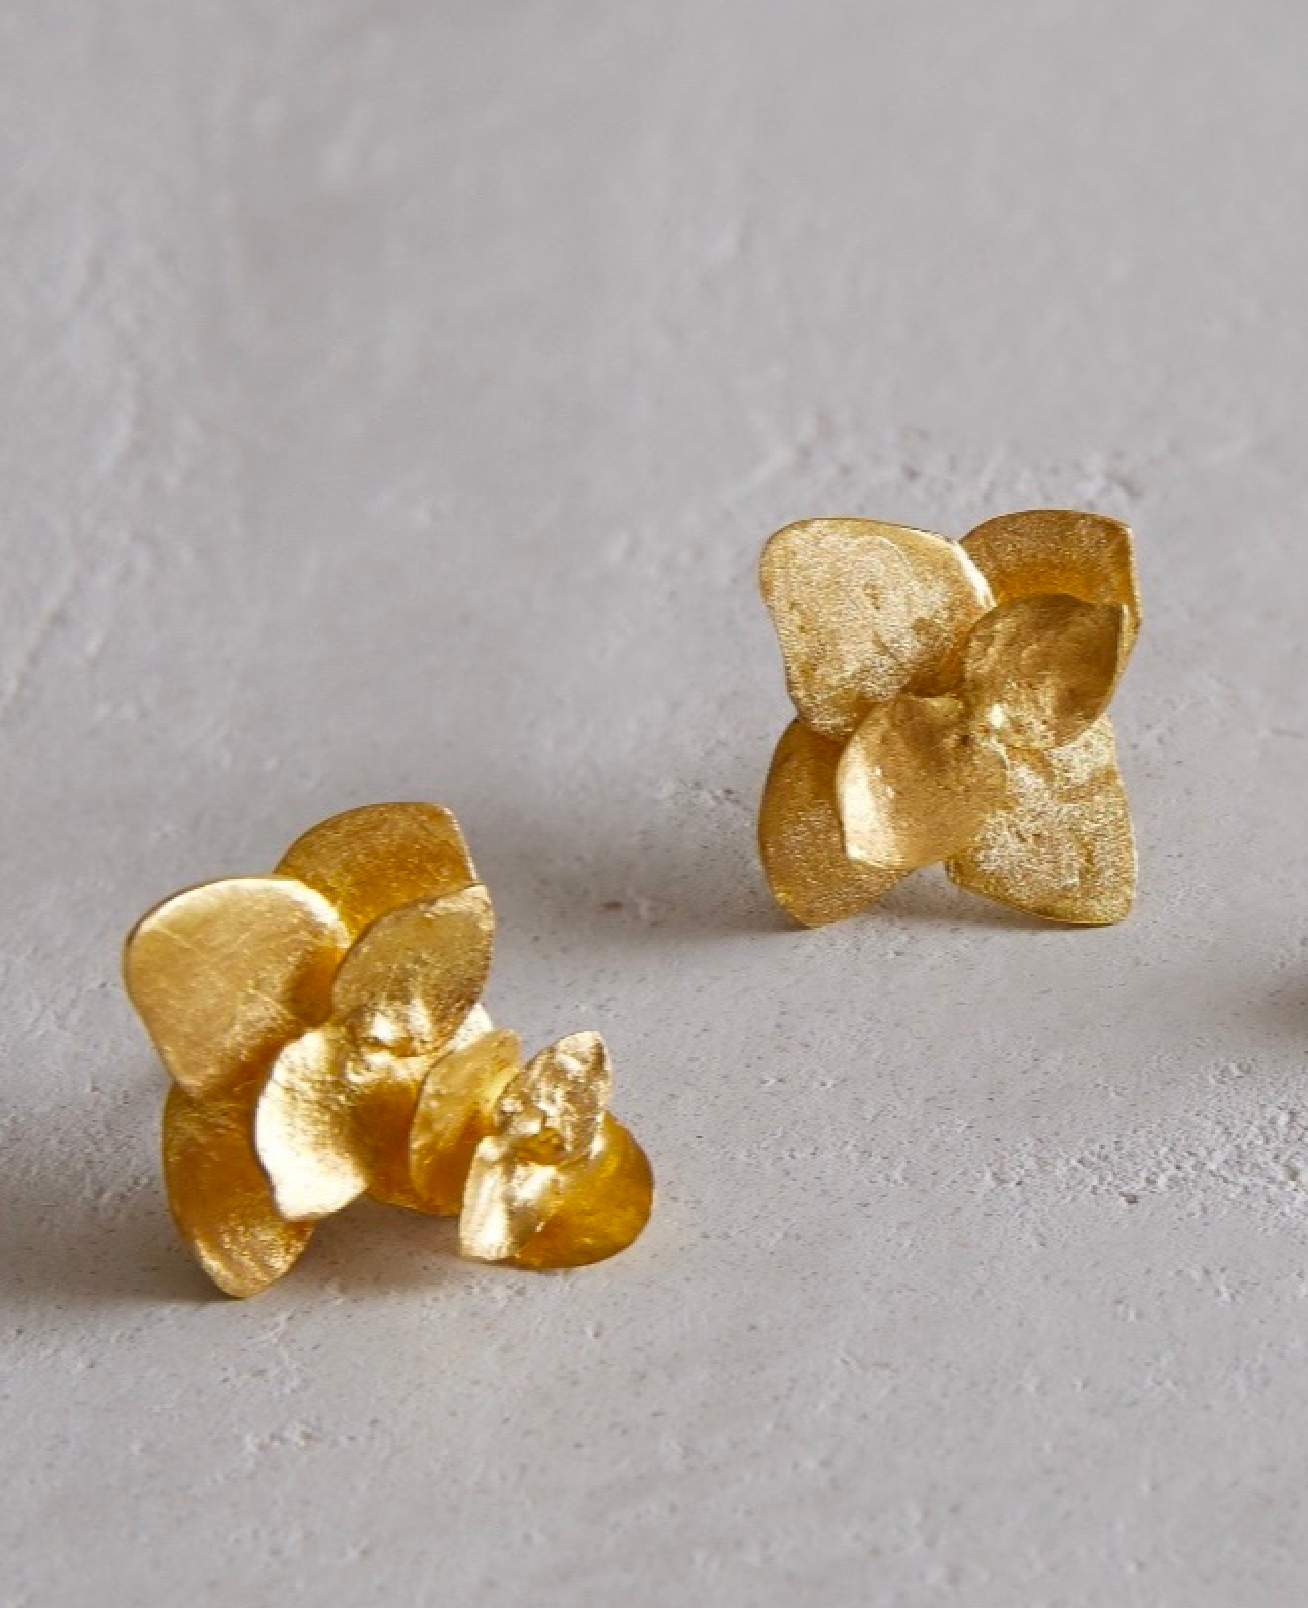 Close up images of original i seira floral gold earrings on a concrete surface